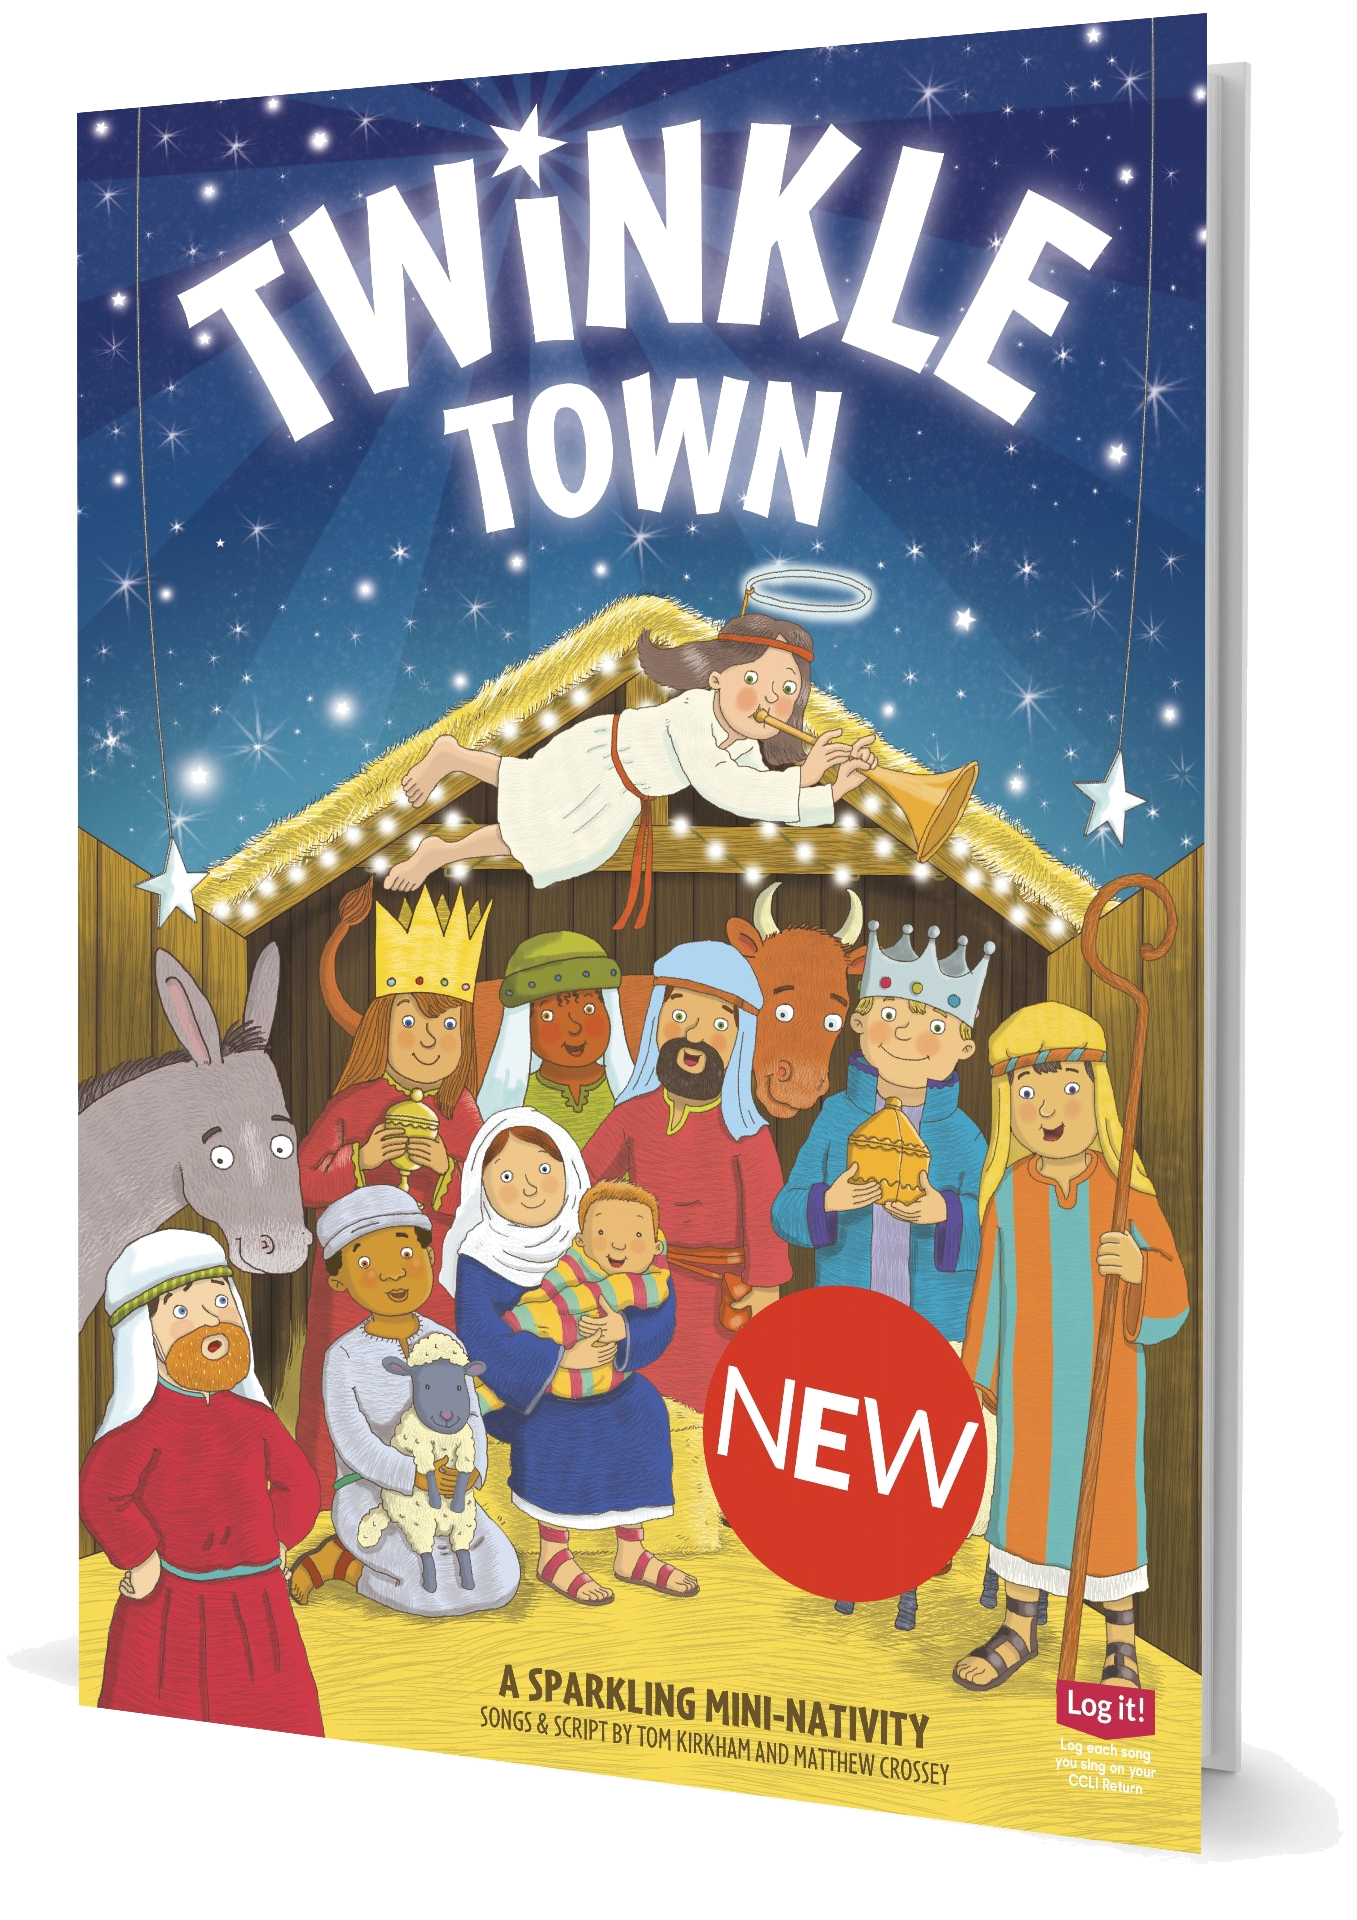 TWINKLE TOWN (A SPARKLING MINI-NATIVITY) by TOM KIRKHAM AND MATTHEW CROSSEY  | Nativity Musical Play The School Musicals Company | 9781916292970